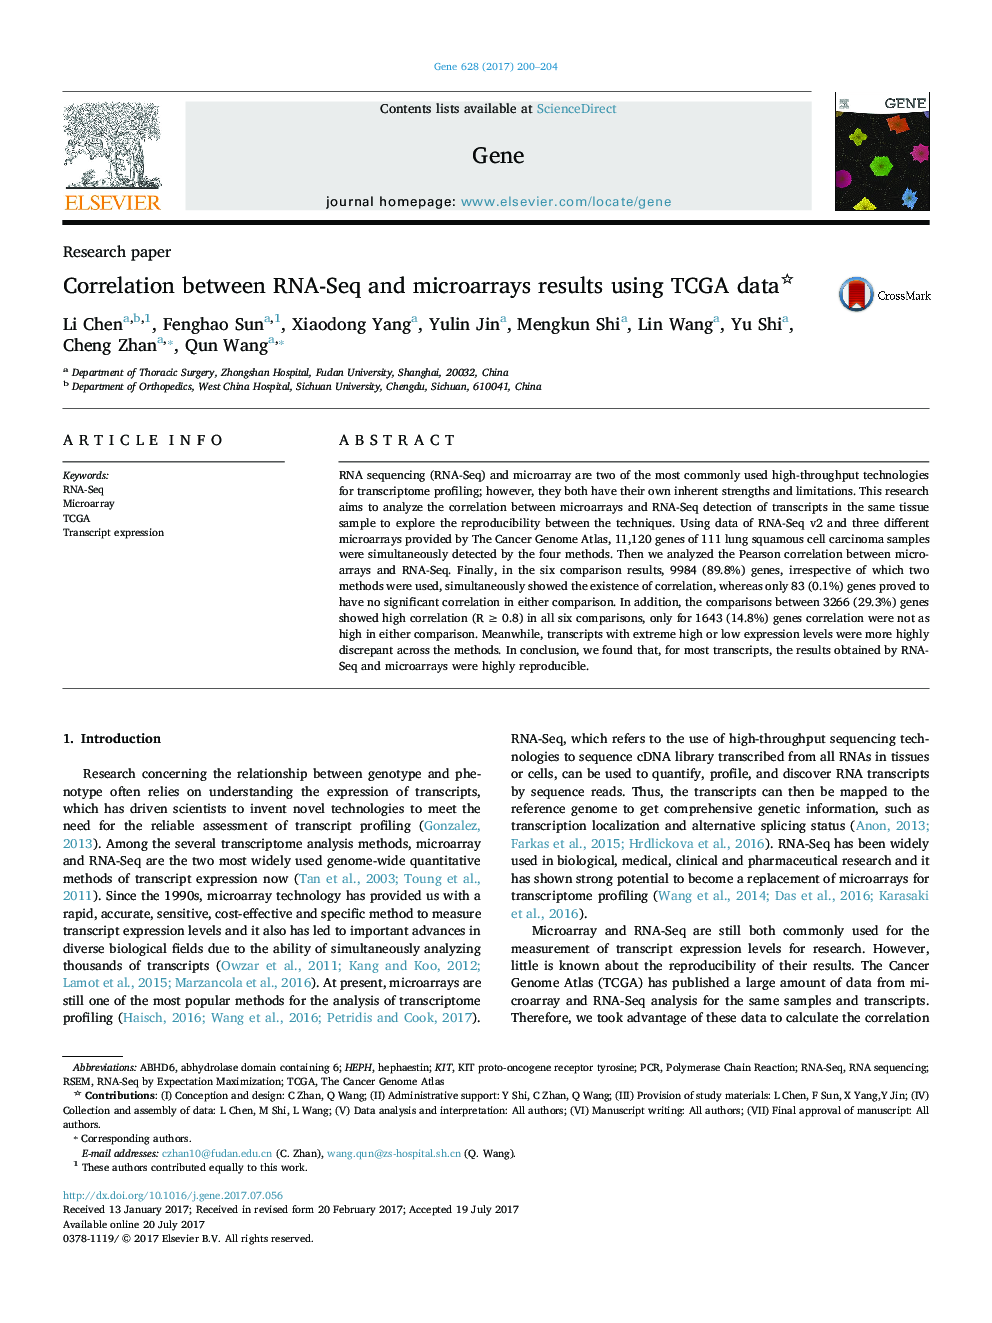 Research paperCorrelation between RNA-Seq and microarrays results using TCGA data